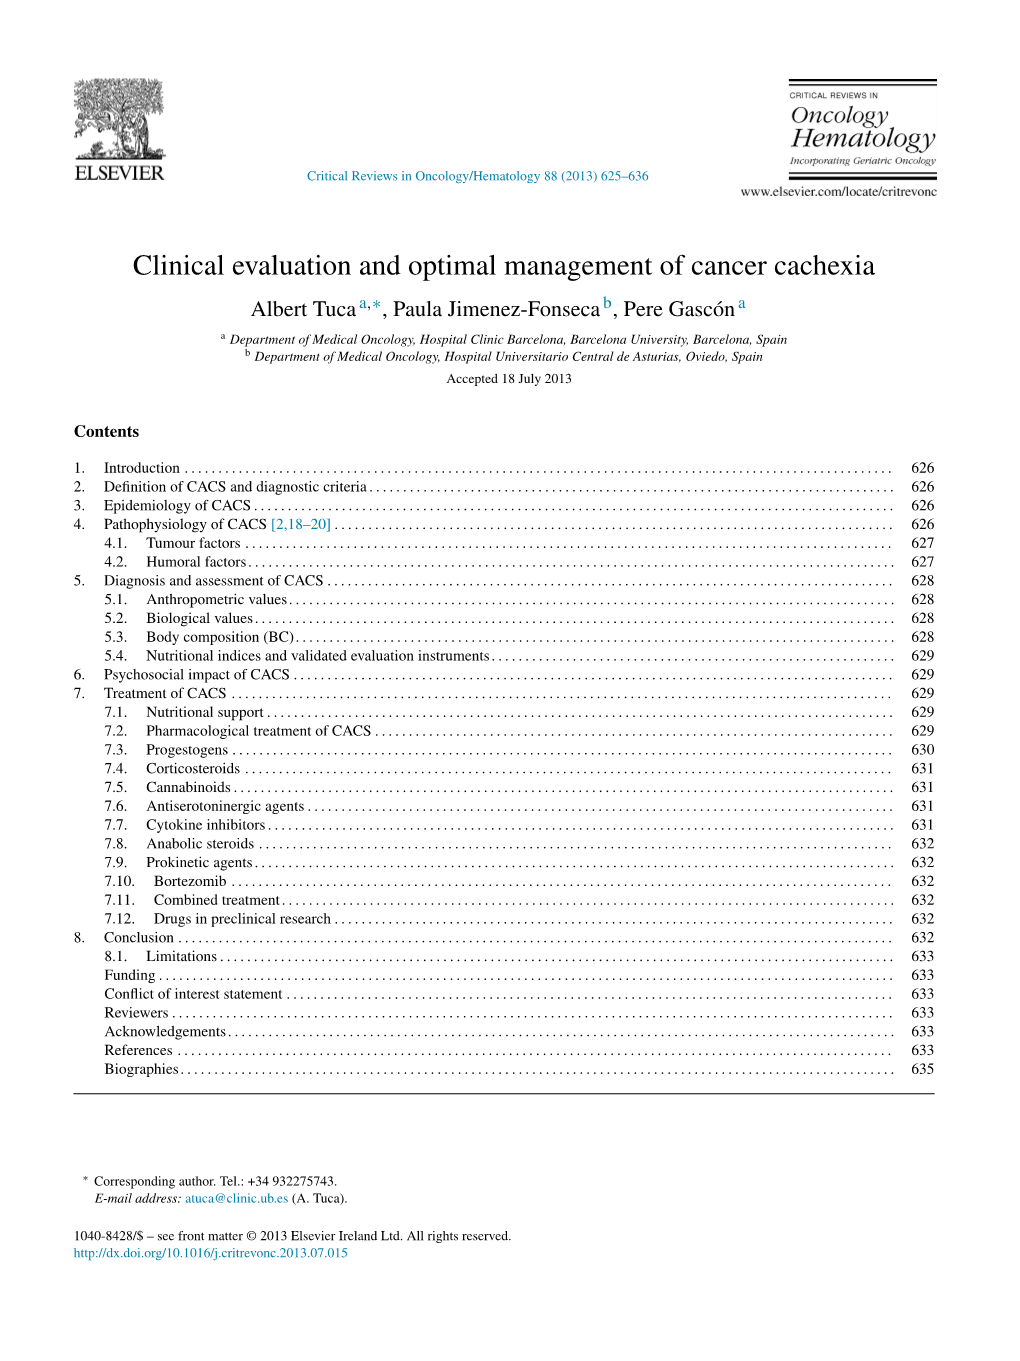 Clinical Evaluation and Optimal Management of Cancer Cachexia